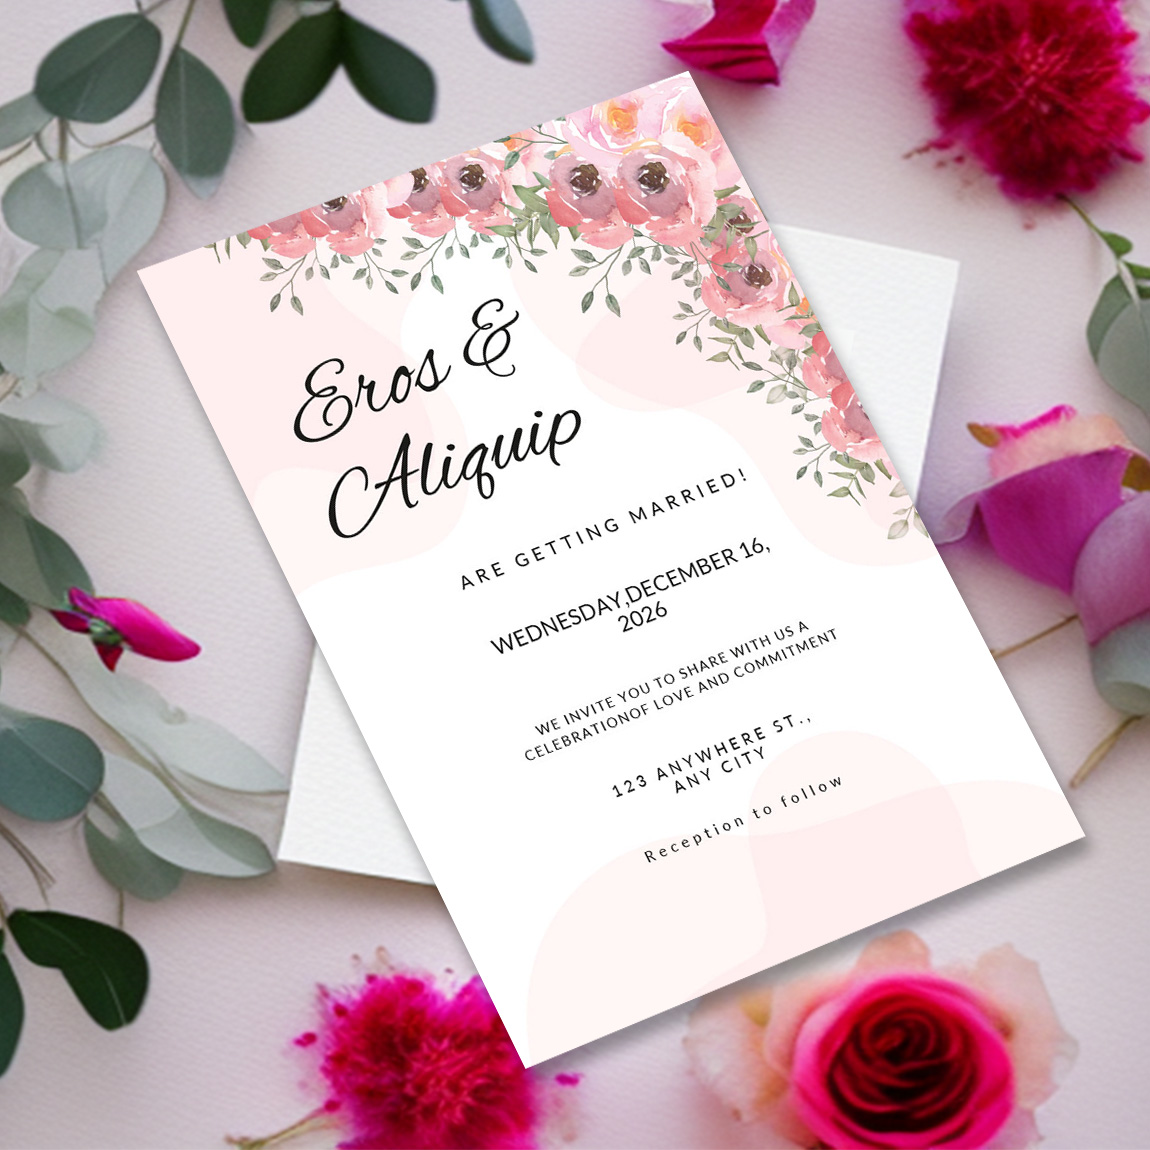 Image of enchanting wedding invitation card with floral background.